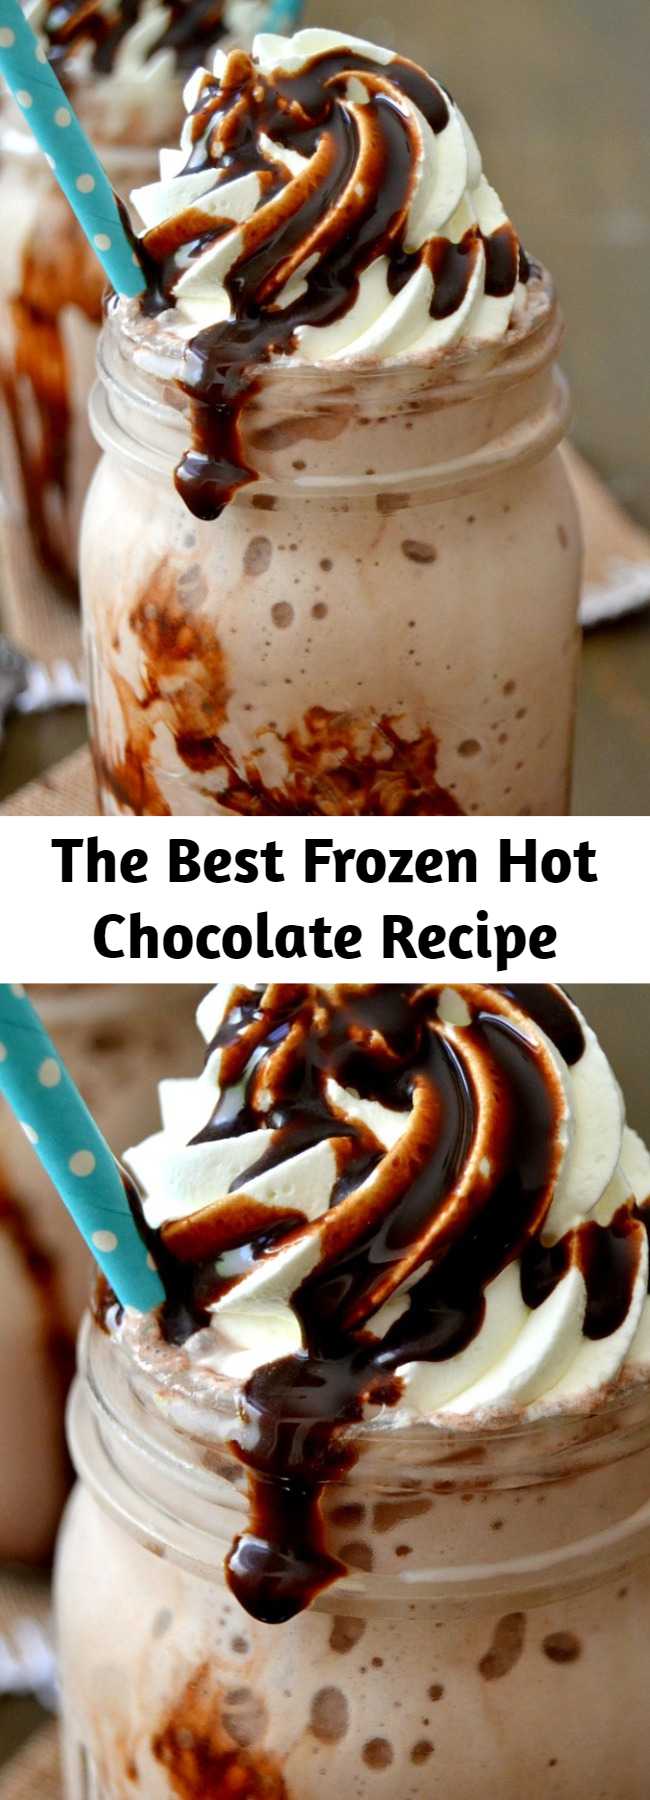 The Best Frozen Hot Chocolate Recipe - These freezy-cool, ultra chocolaty Frozen Hot Chocolates are to-die for! Rich and creamy, you'll love the cocoa flavor and frosty texture. You'll love this easy, foolproof recipe!